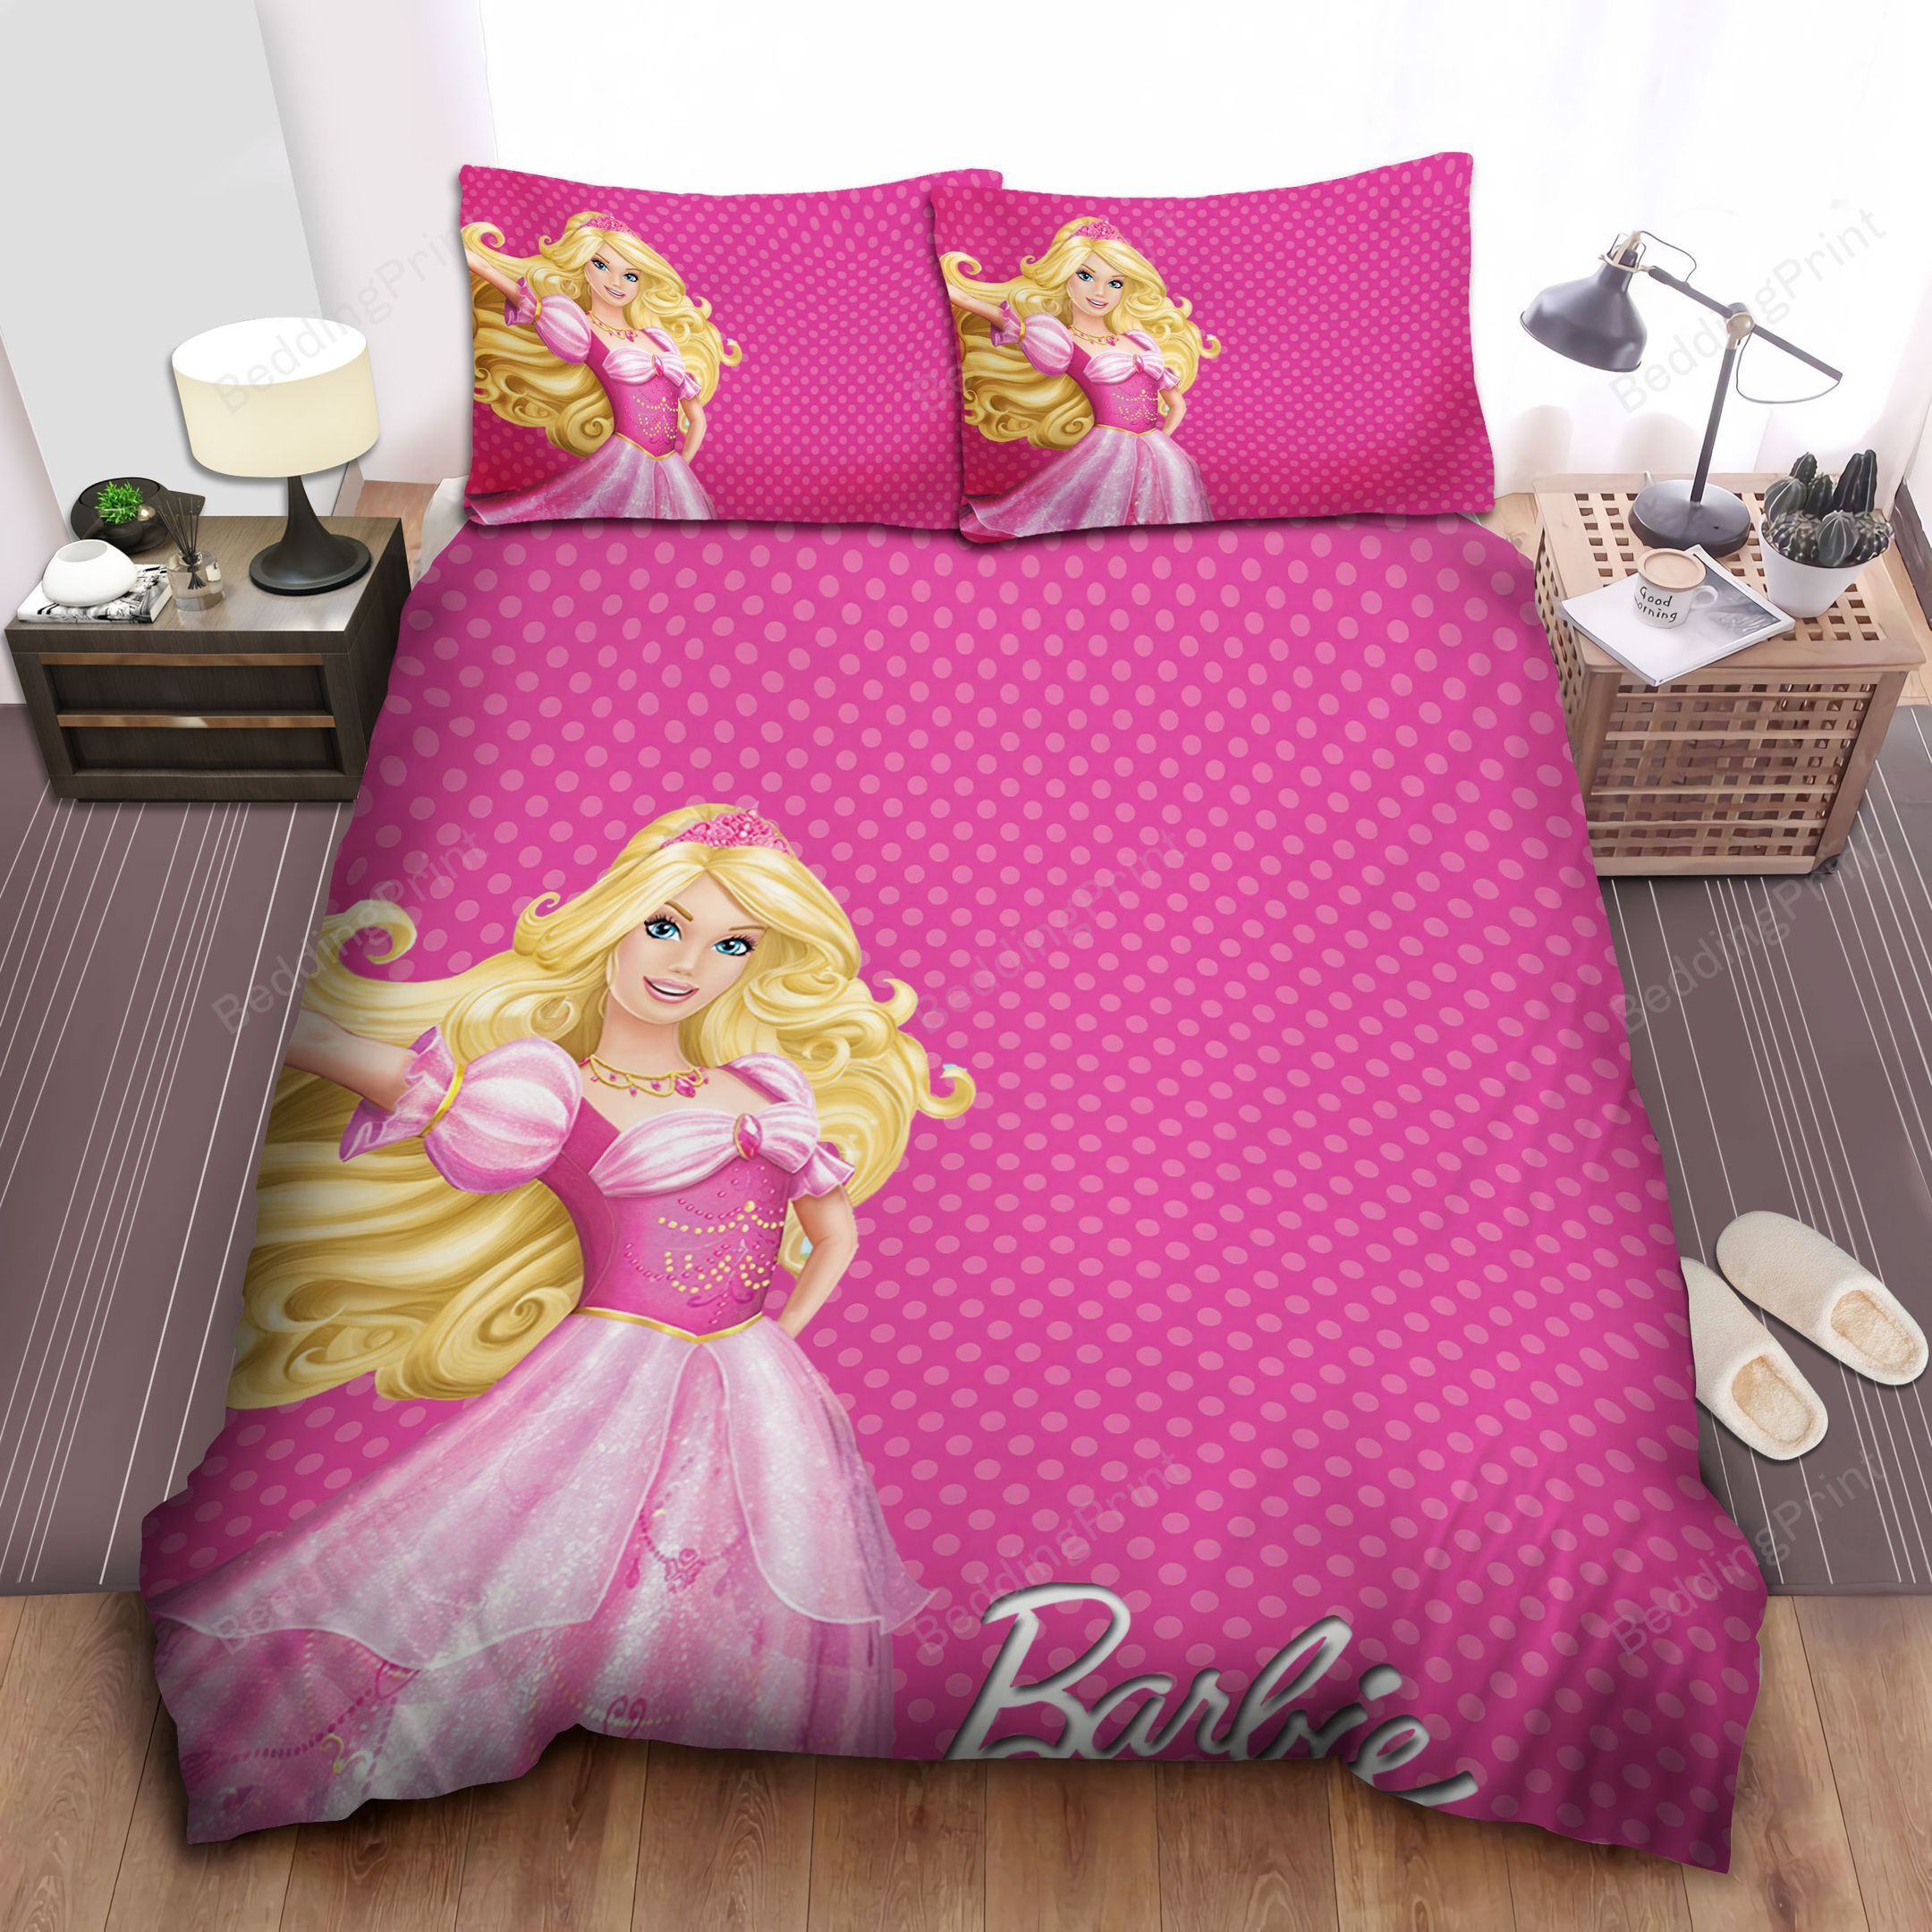 barbie-bed-pink-dress-sheets-duvet-cover-bedding-sets-please-note-this-is-a-duvet-cover-not-a